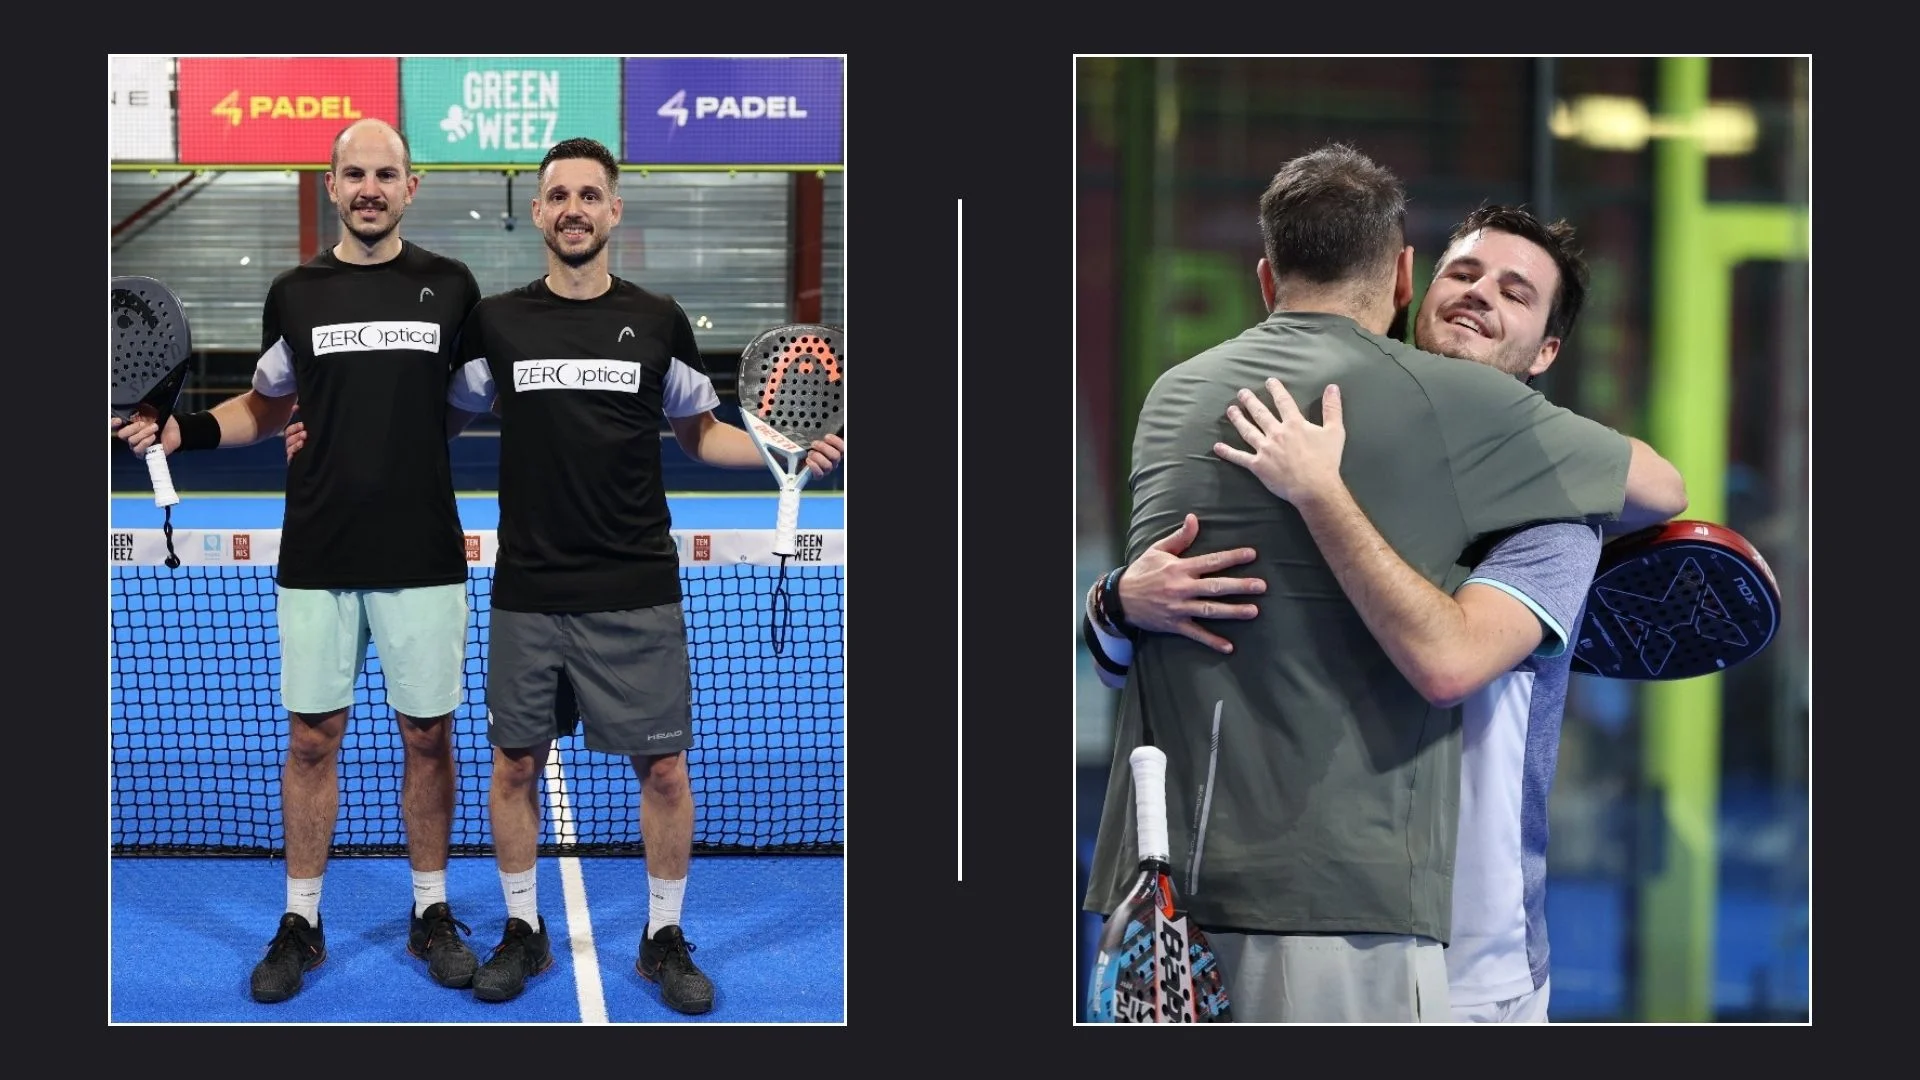 P2000 4Padel Strasbourg – Benoît Theard and Thibaud Pech create a surprise and join Johan Bergeron and Adrien Maigret in the final